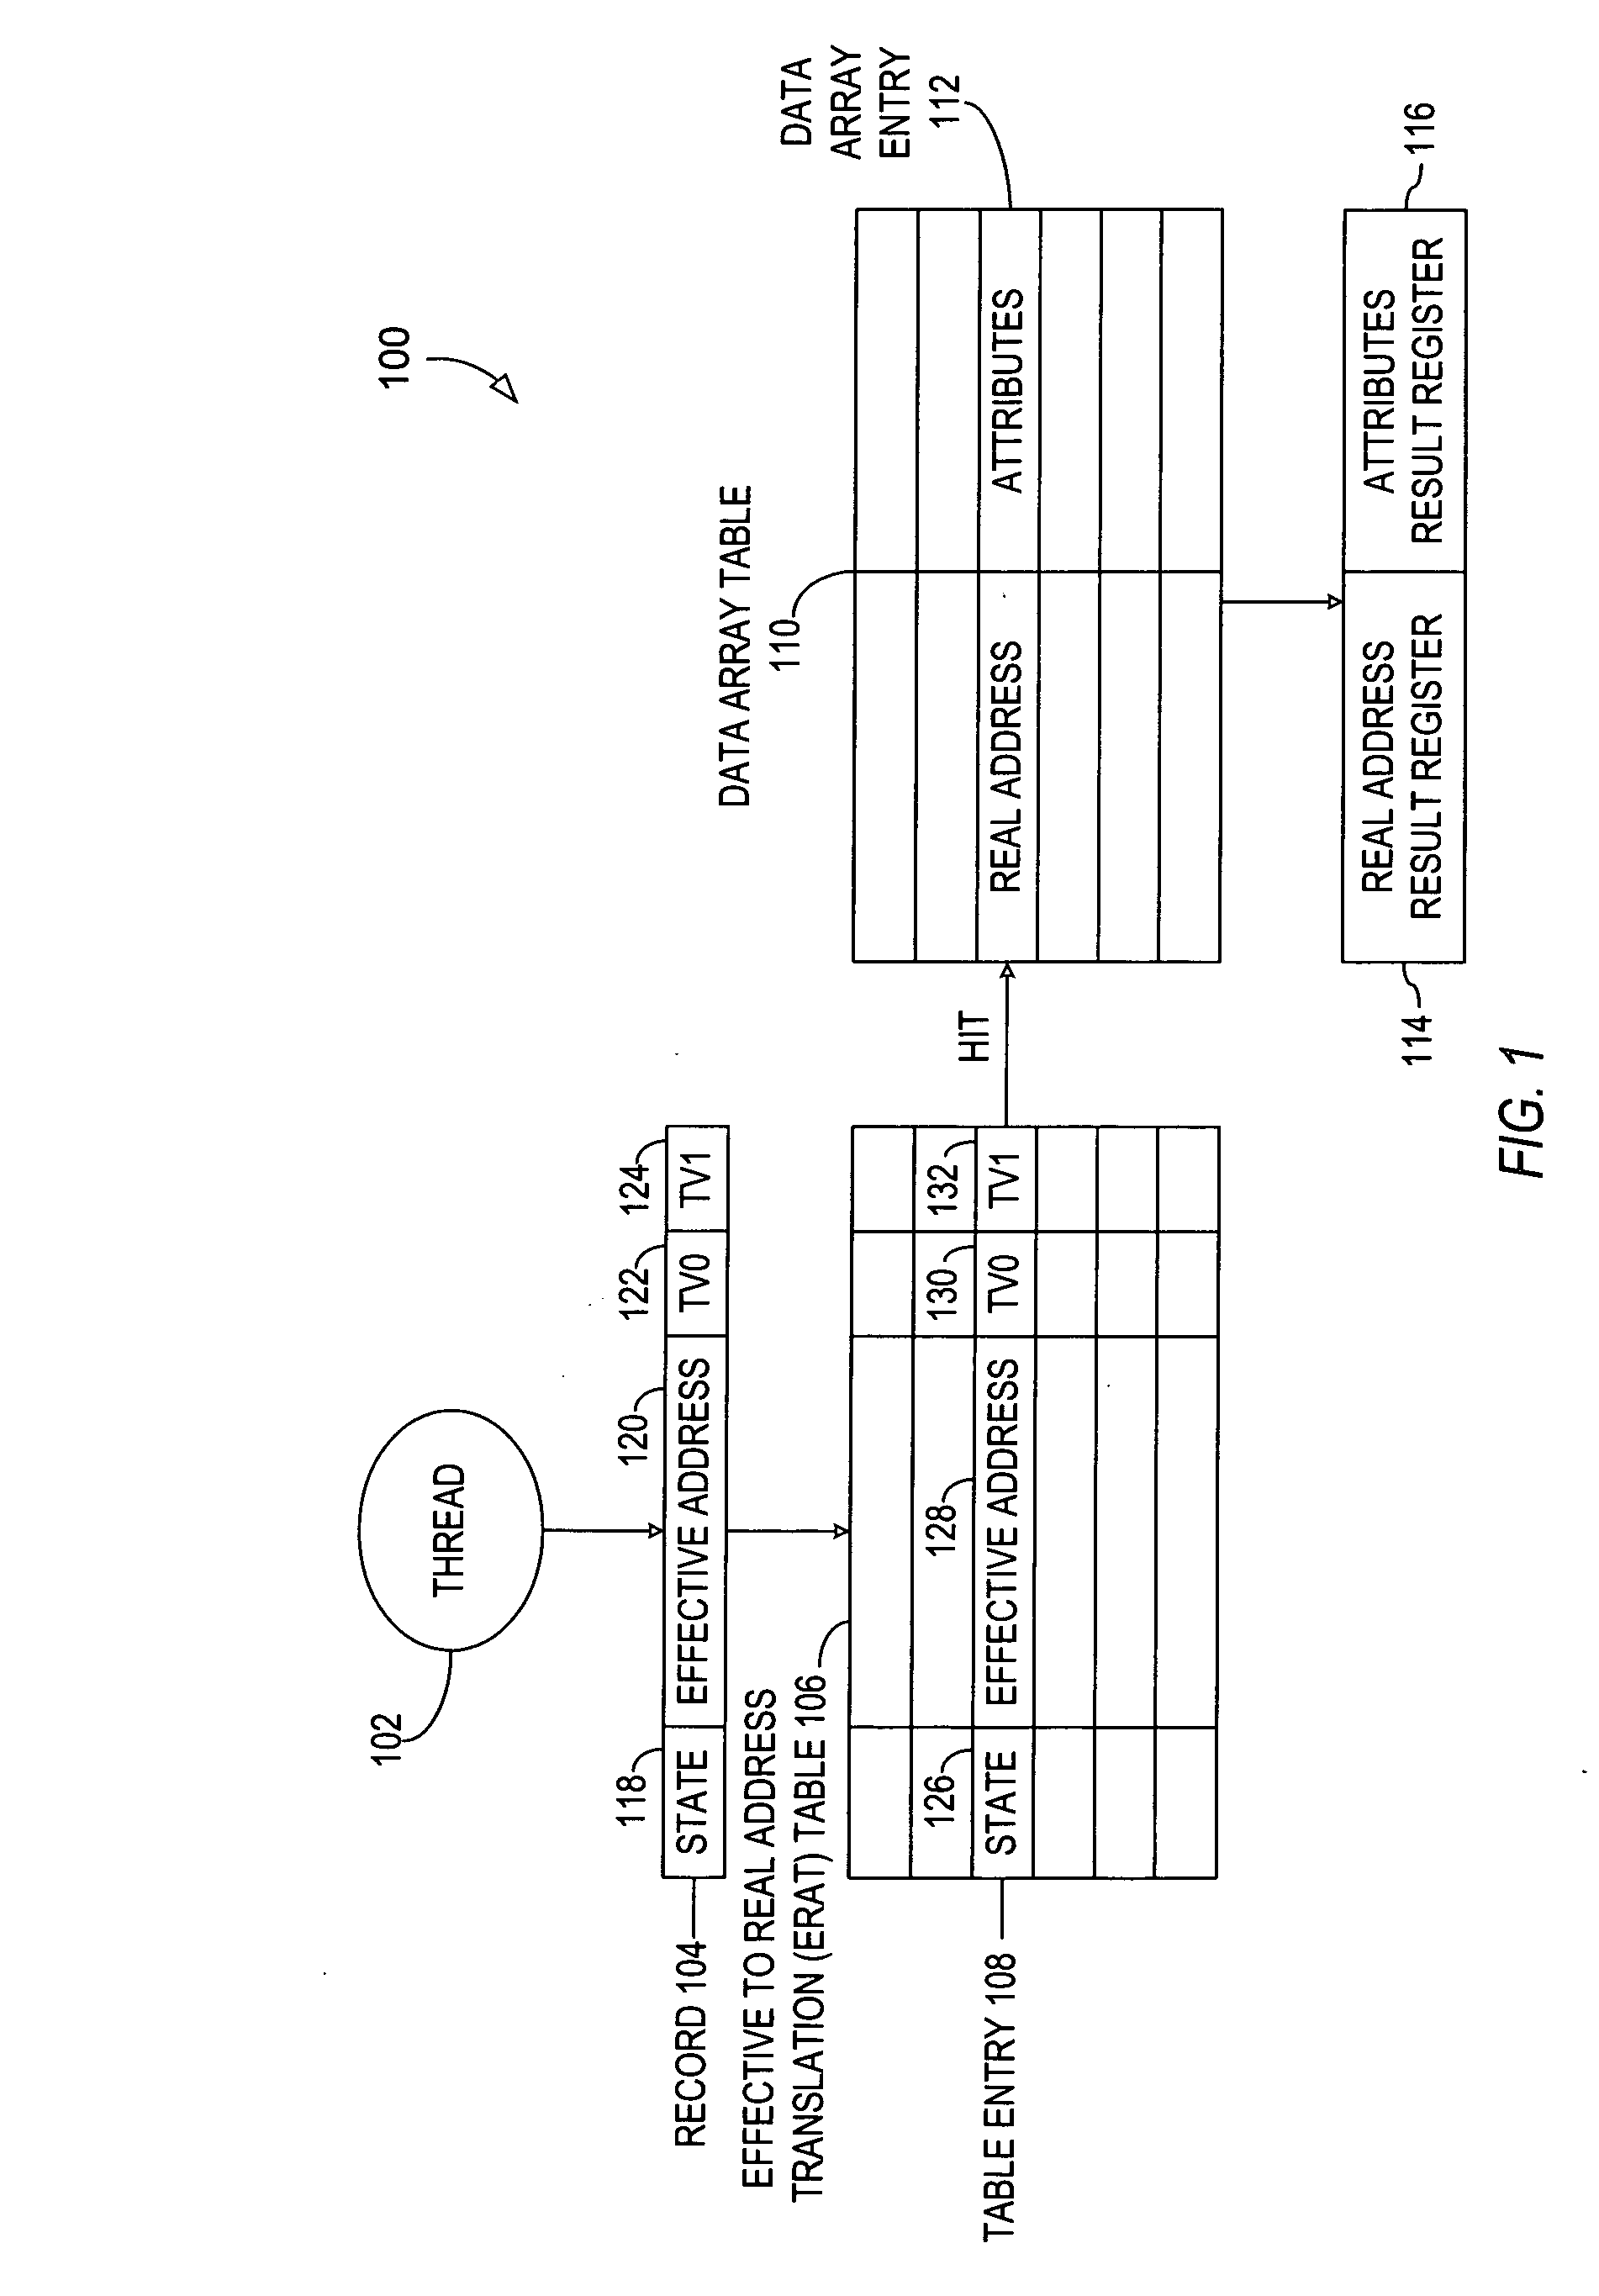 Method of effective to real address translation for a multi-threaded microprocessor